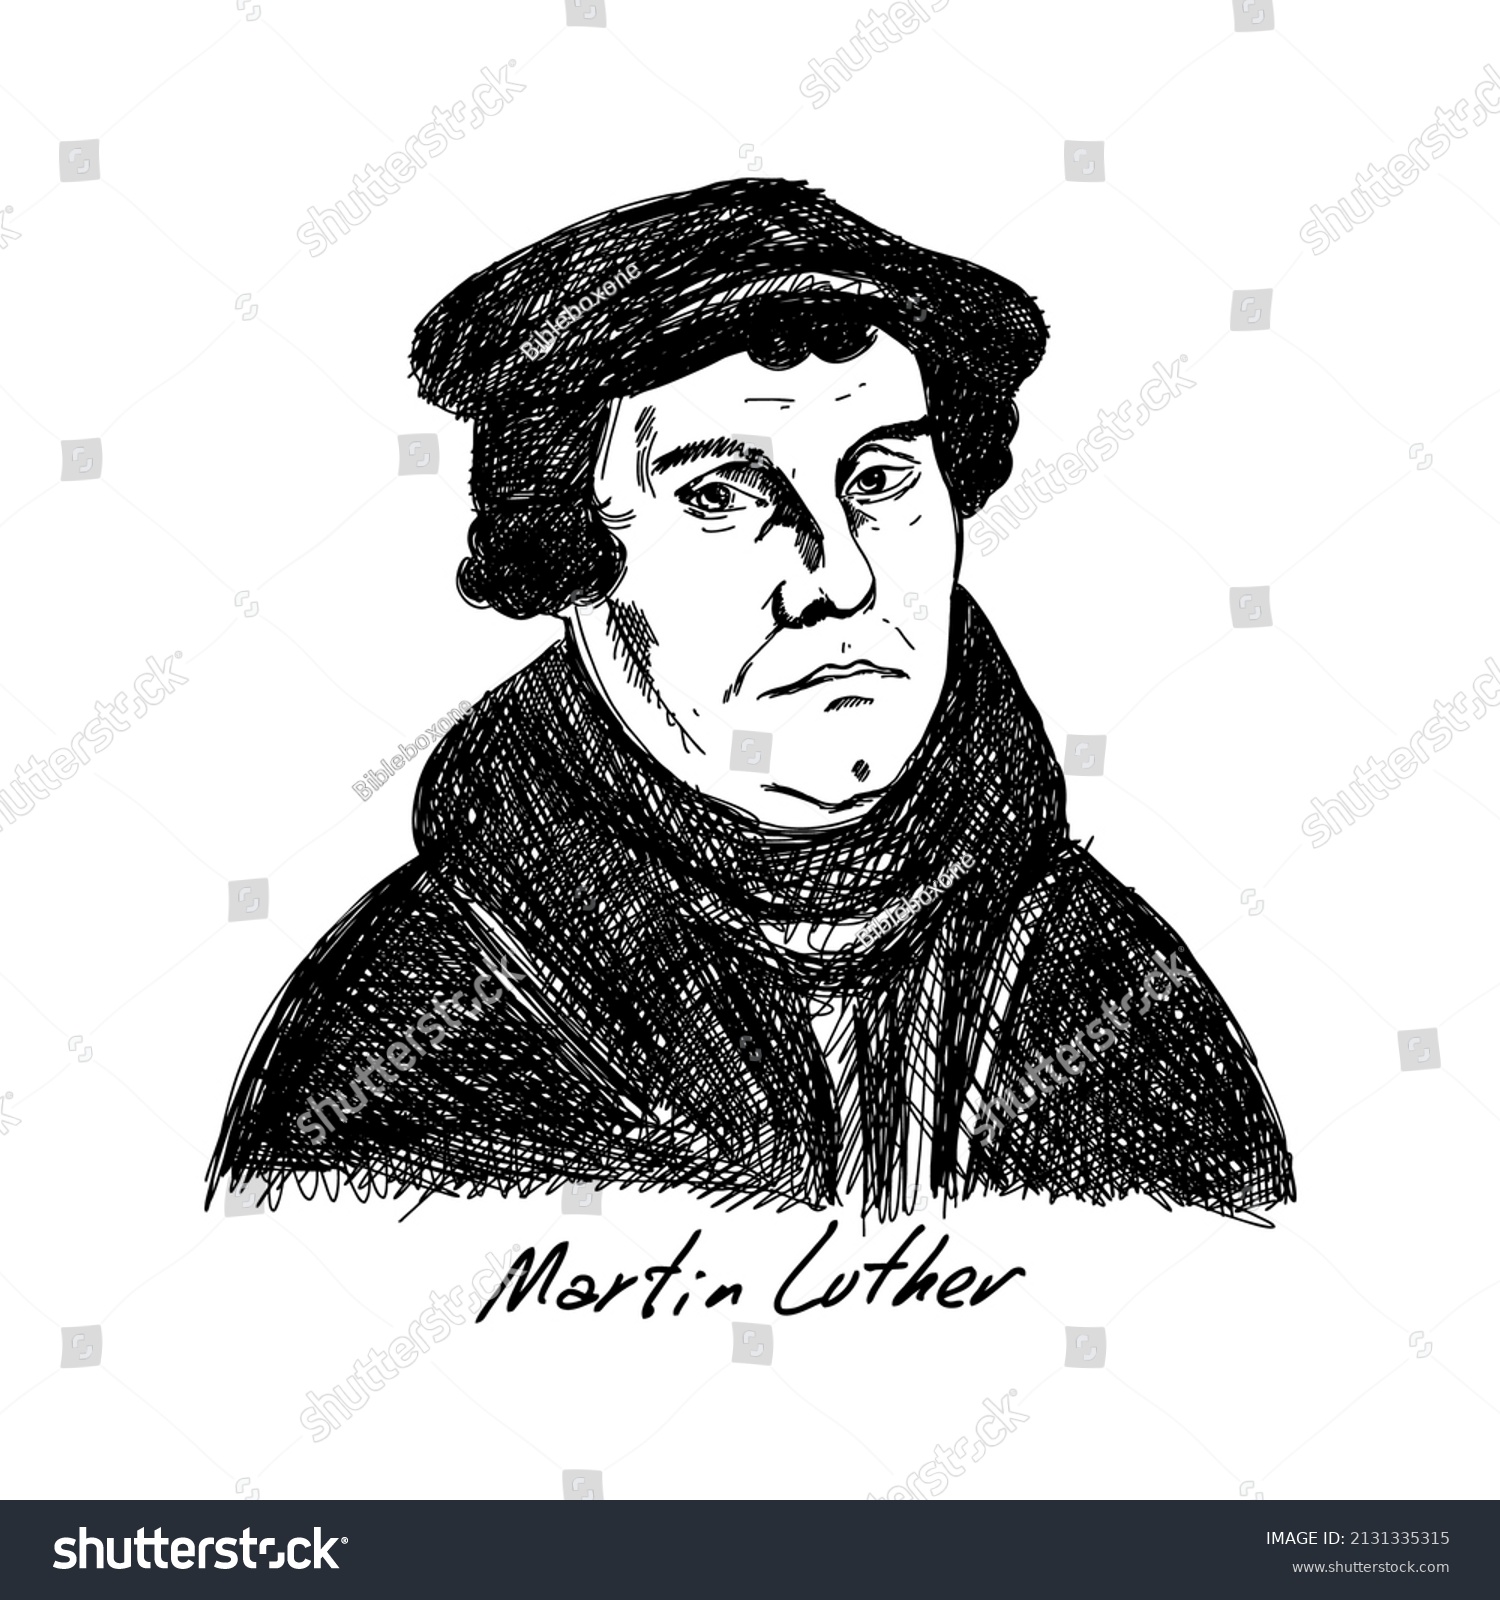 Martin Luther (1483-1546) was a German professor of theology, composer, priest, monk, and a seminal figure in the Protestant Reformation. Christian figure. #2131335315